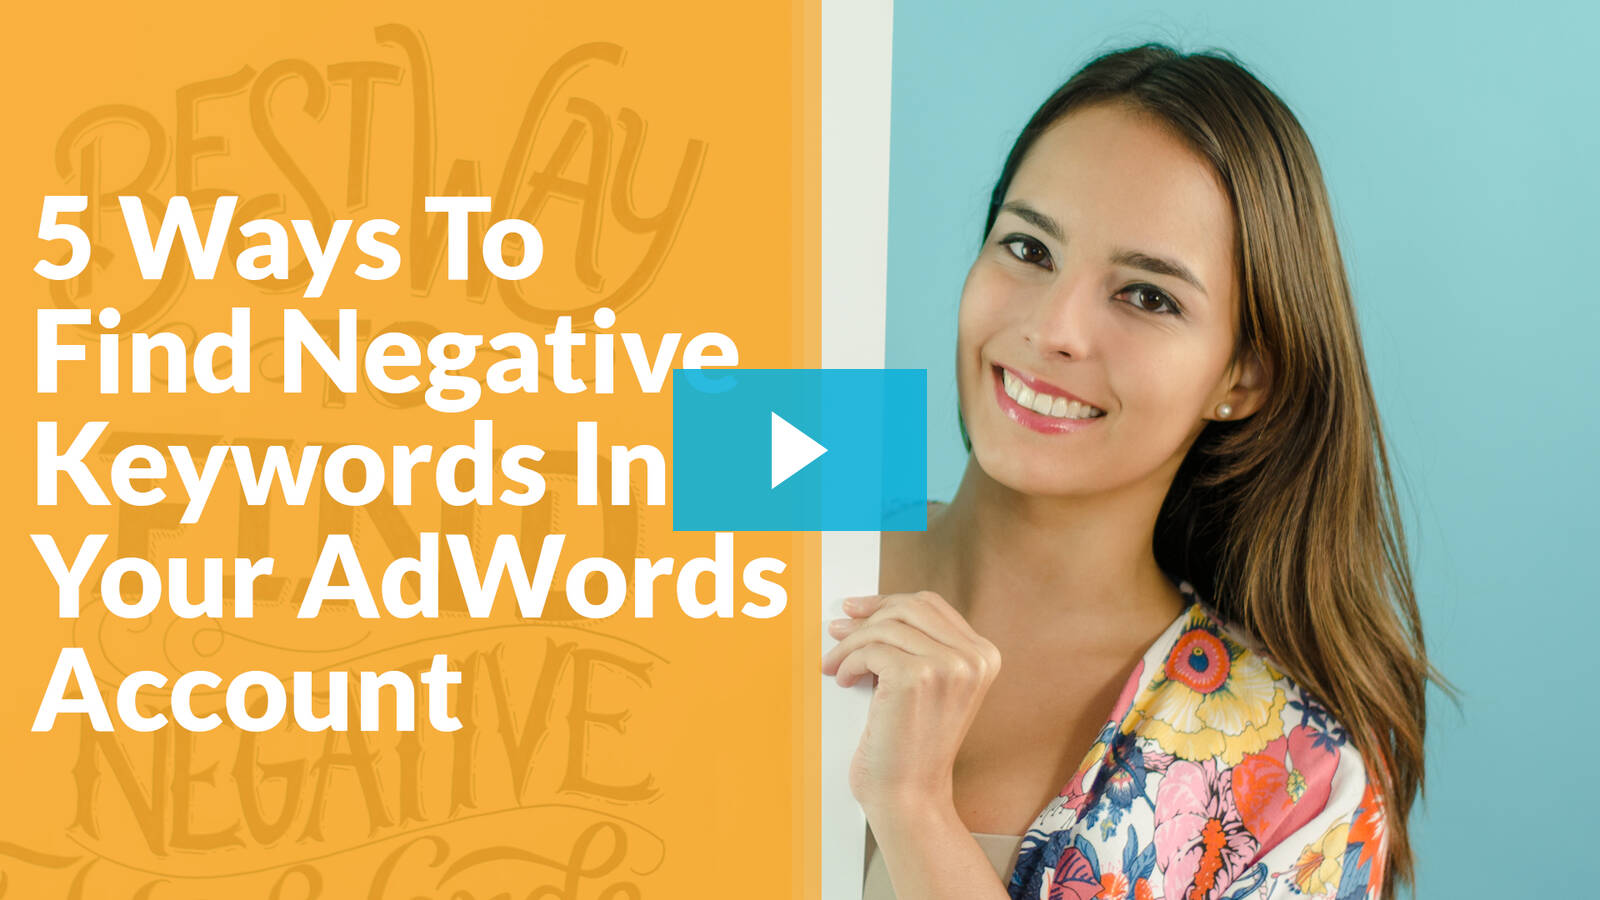 The Best 5 Ways to Find Negative Keywords in Your AdWords Accounts